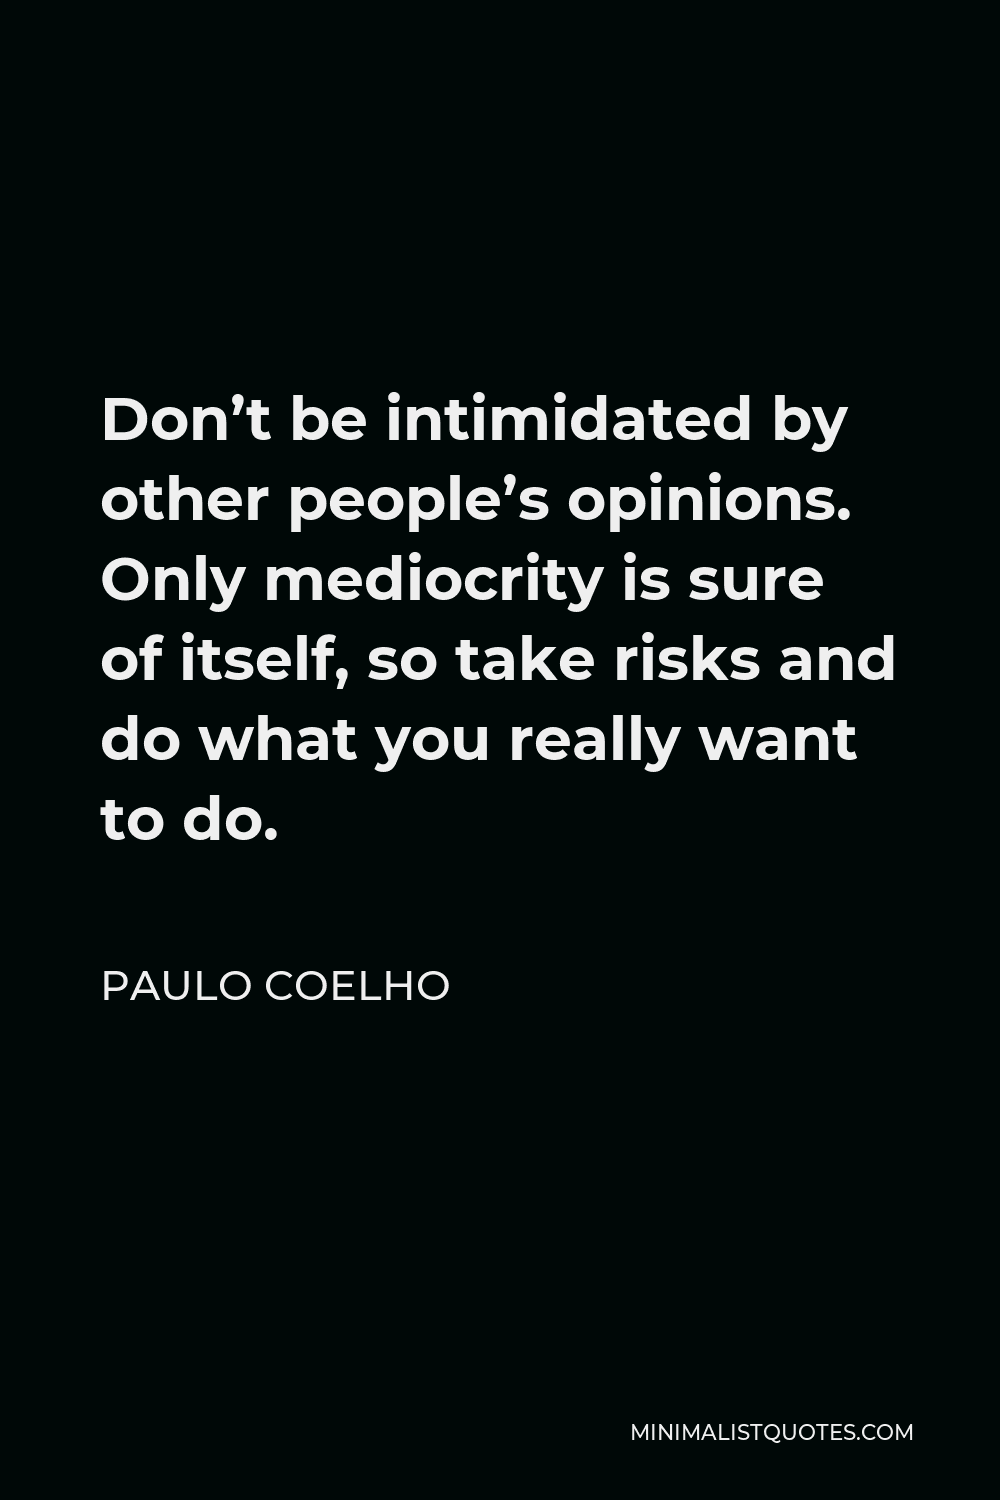 Paulo Coelho Quote - Don’t be intimidated by other people’s opinions. Only mediocrity is sure of itself, so take risks and do what you really want to do.